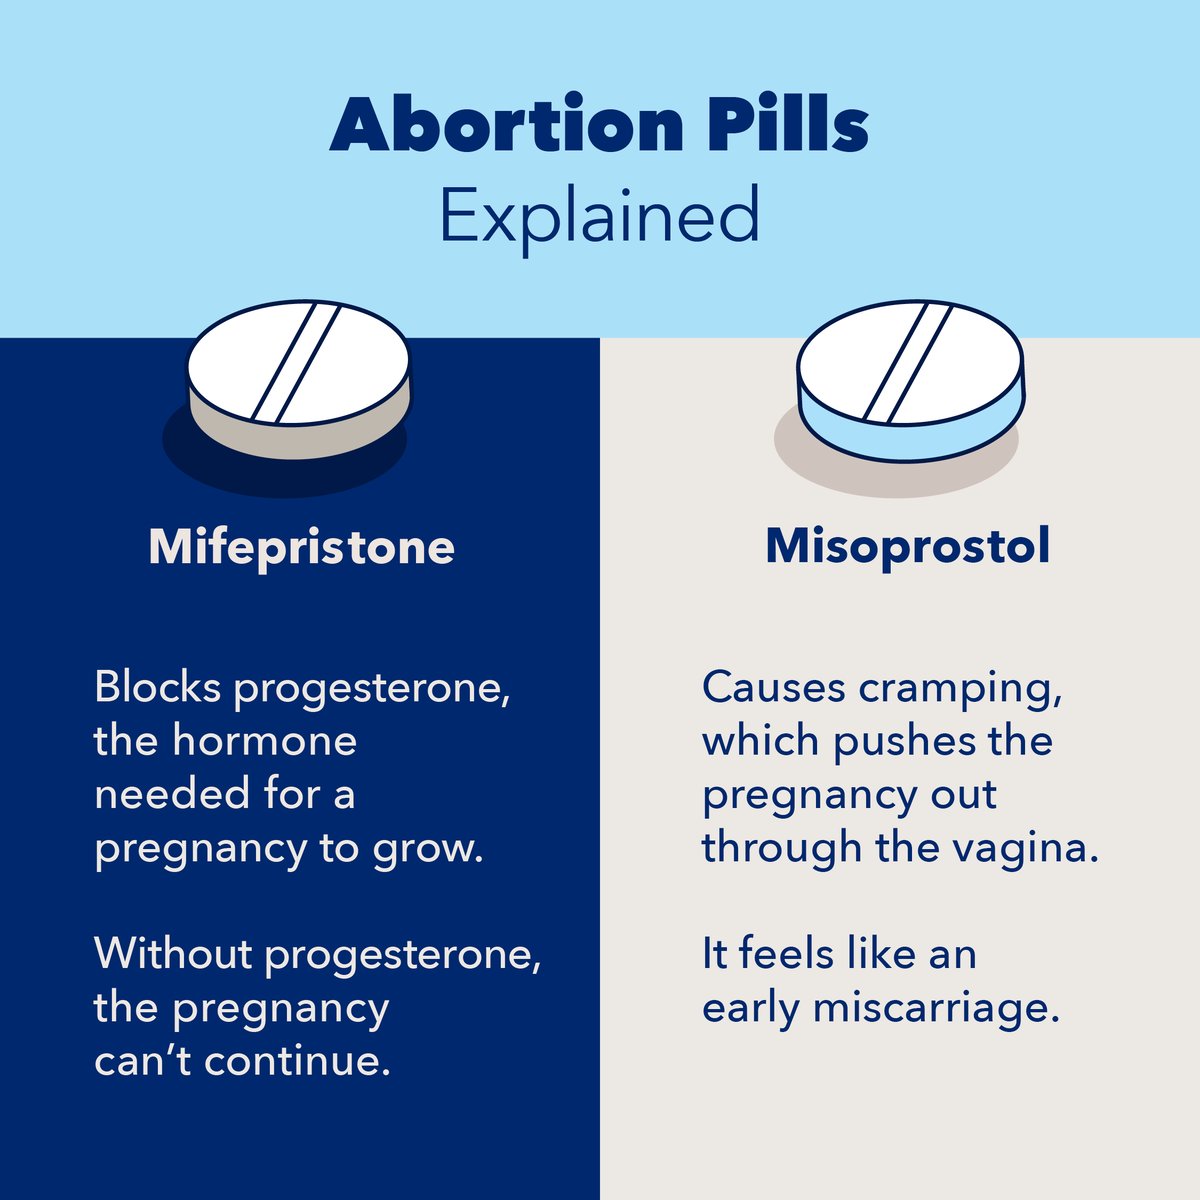 The “abortion pill” is the common name for medication abortion – which is used up to 11 weeks from the first day of your last period. You can either use both mifepristone and misoprostol or misoprostol-only to end the pregnancy. Learn more: p.ppfa.org/3ka8Duu